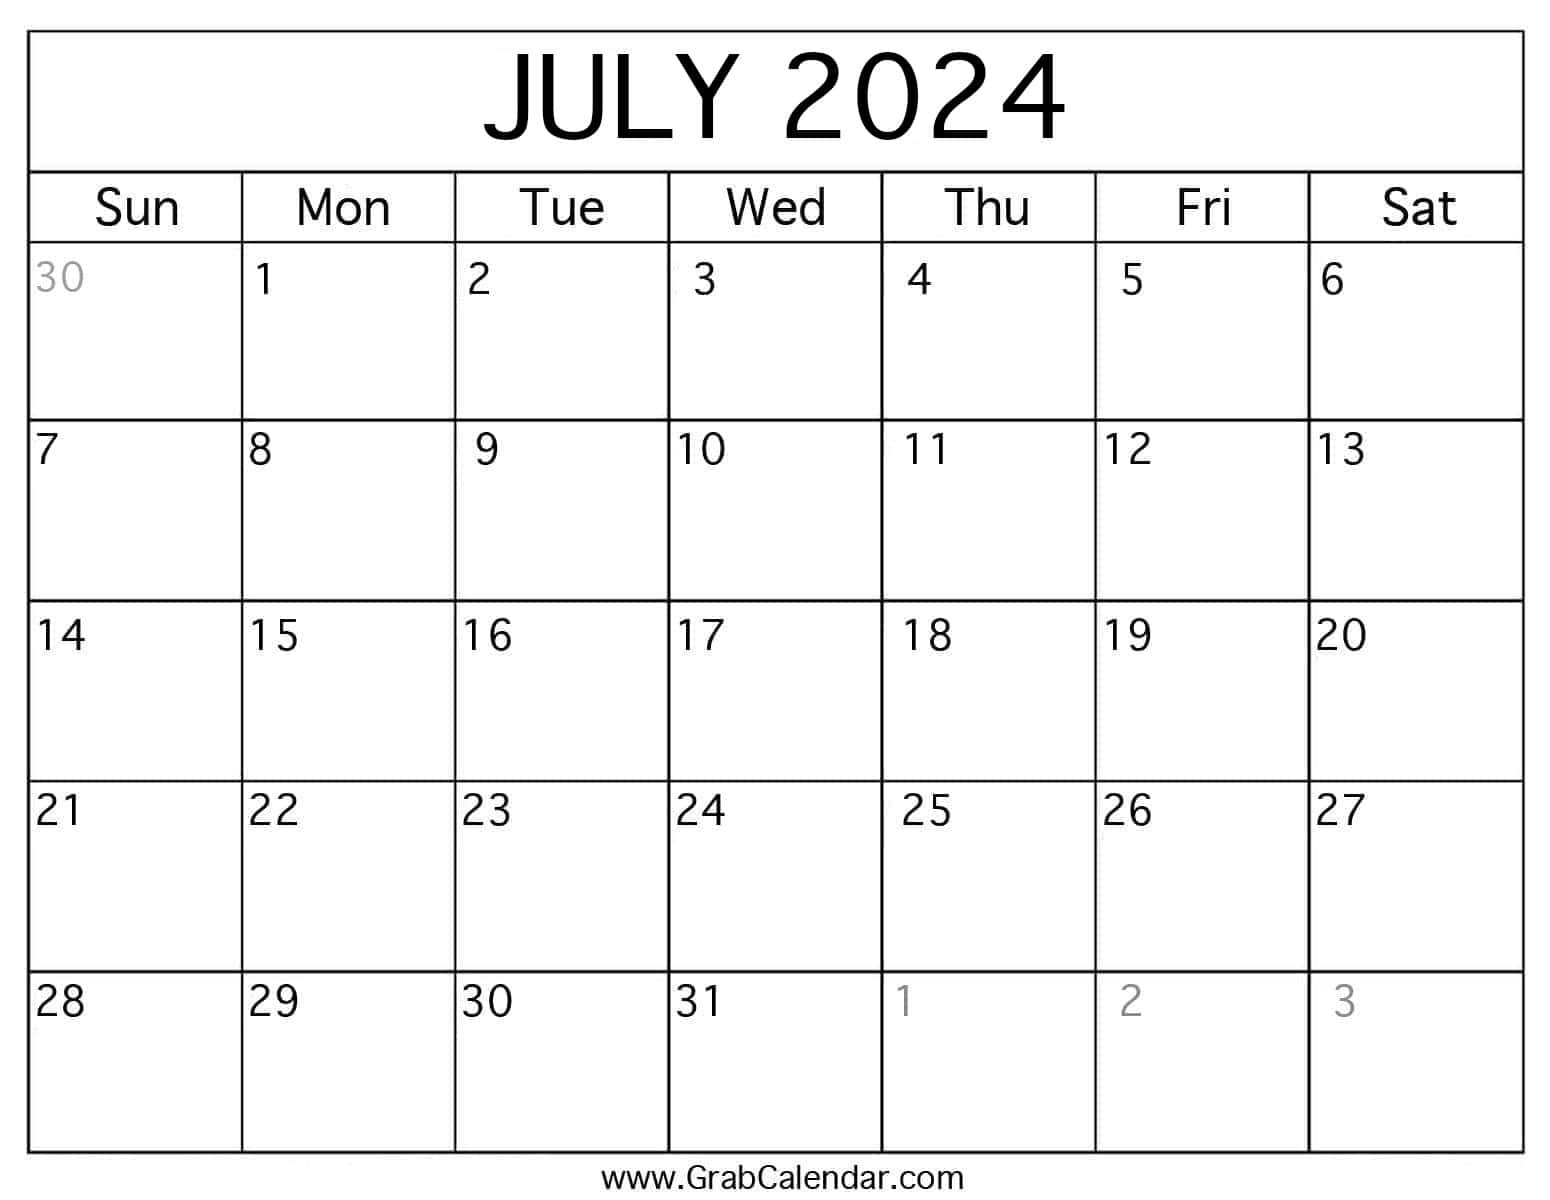 Printable July 2024 Calendar with regard to July 2024 Calender